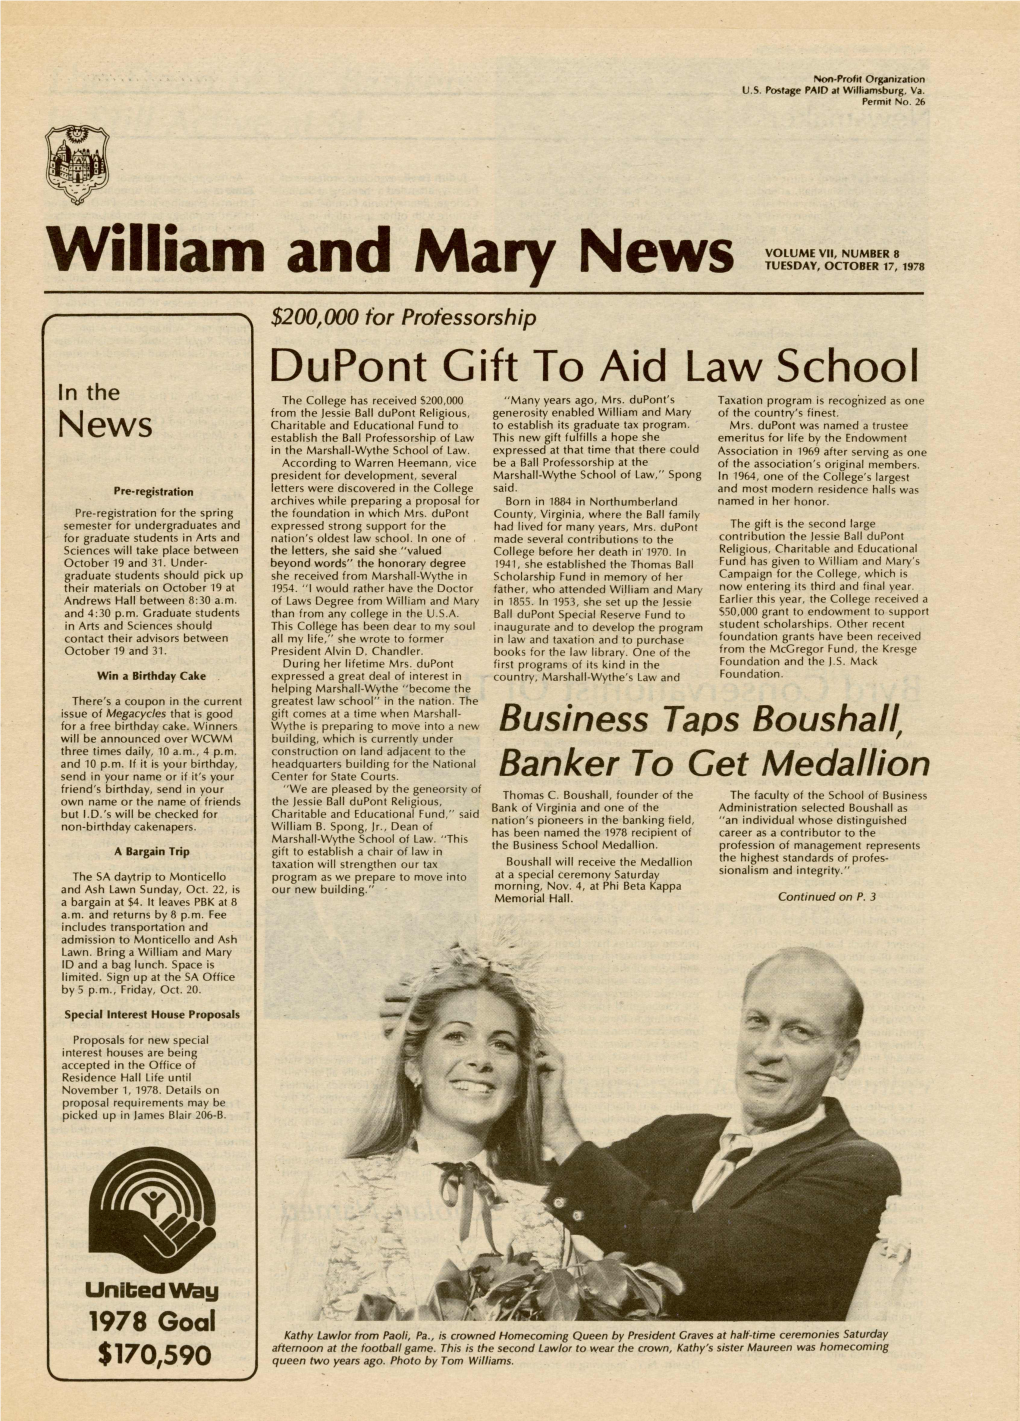 William and Mary News VOLUME VII, NUMBER 8